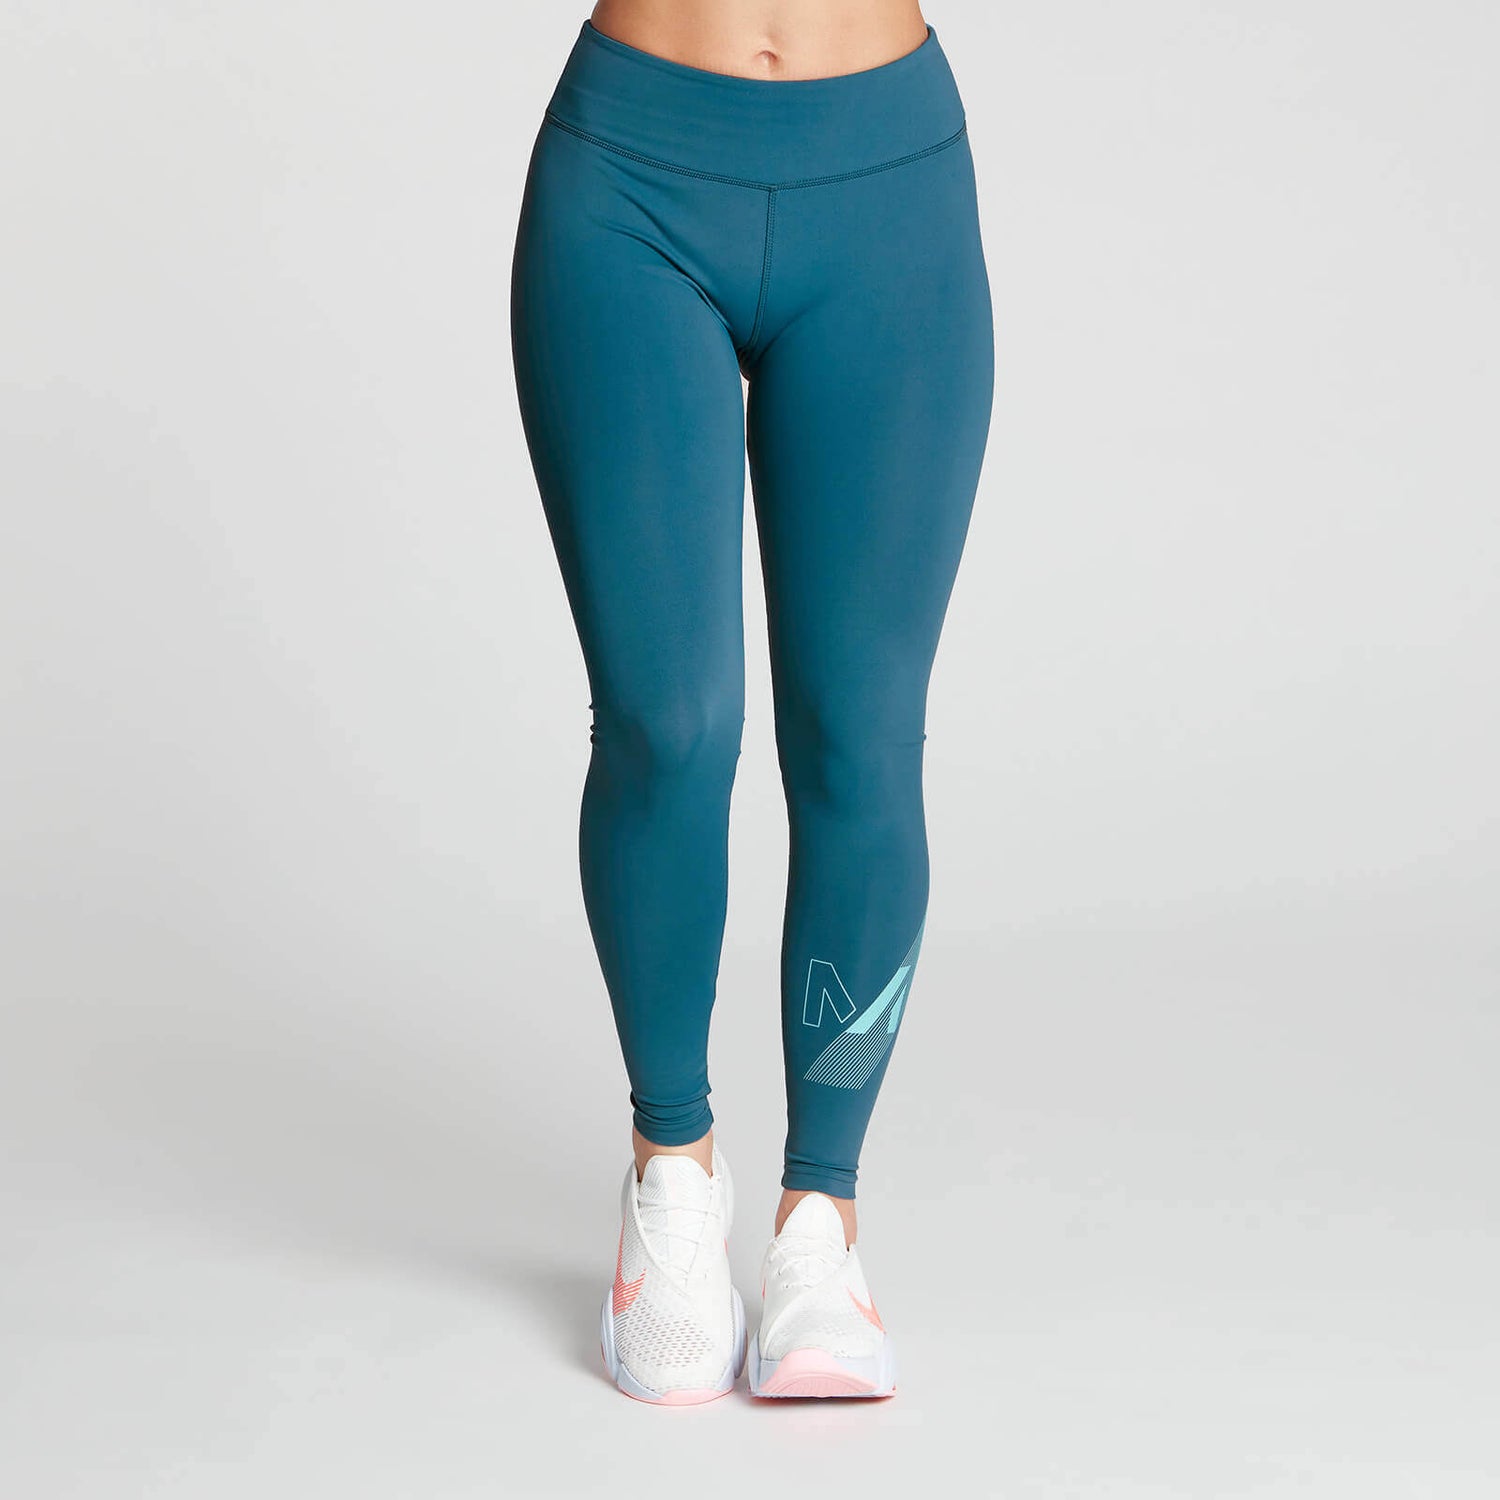 MP Women's Limited Edition Impact Leggings - Teal